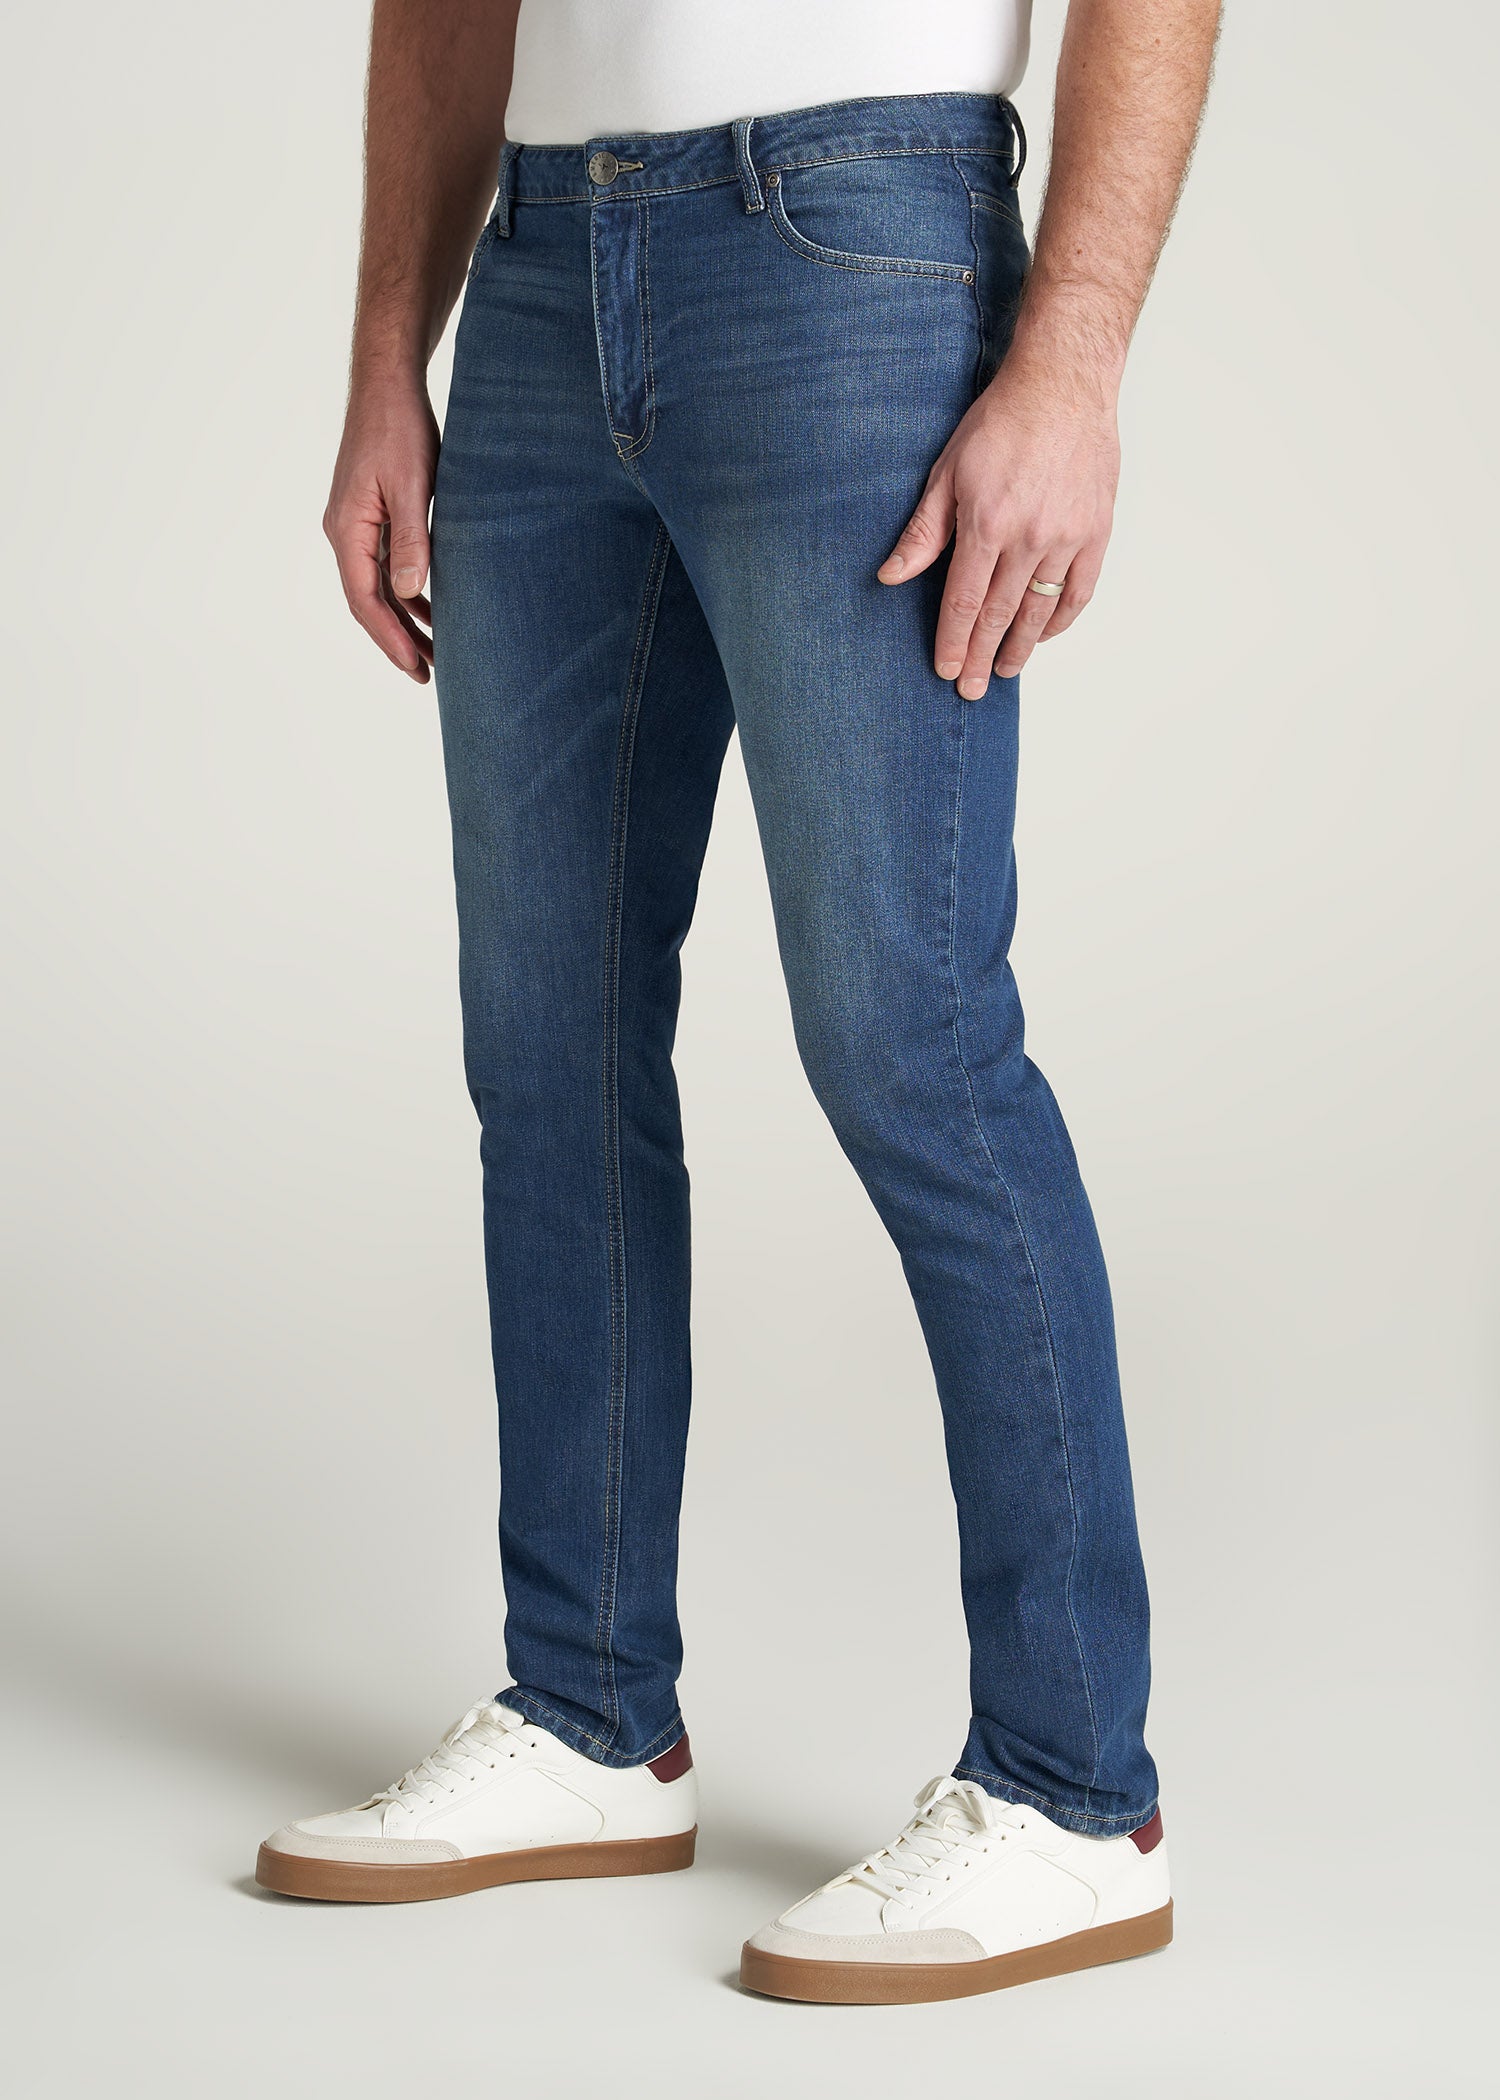 Carman Tapered Jeans For Tall Men Classic Blue | American Tall